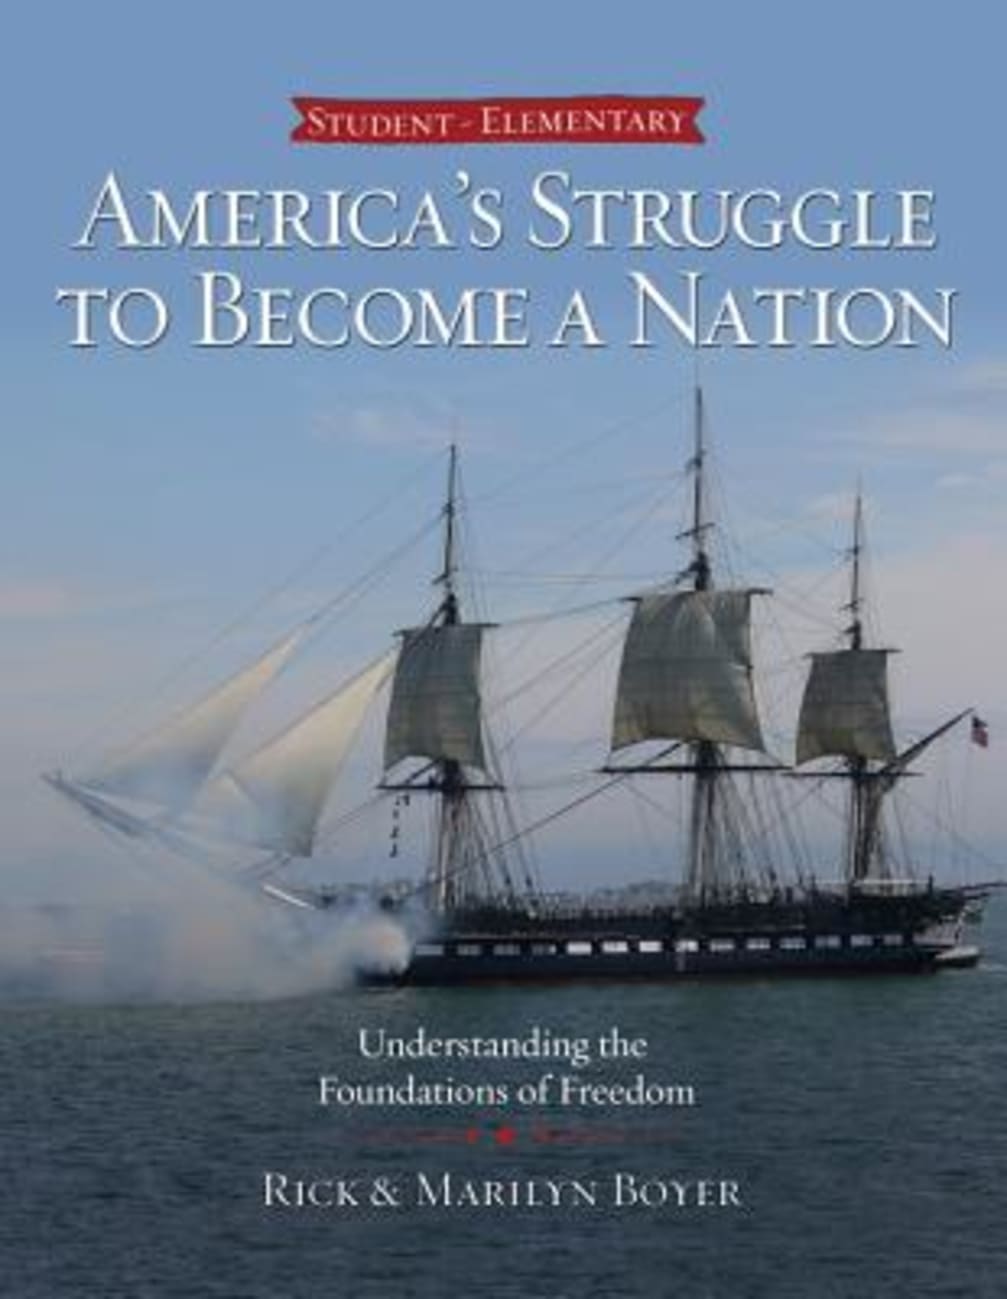 America's Struggle to Become a Nation: Understanding the Foundations of Freedom (Student) Paperback